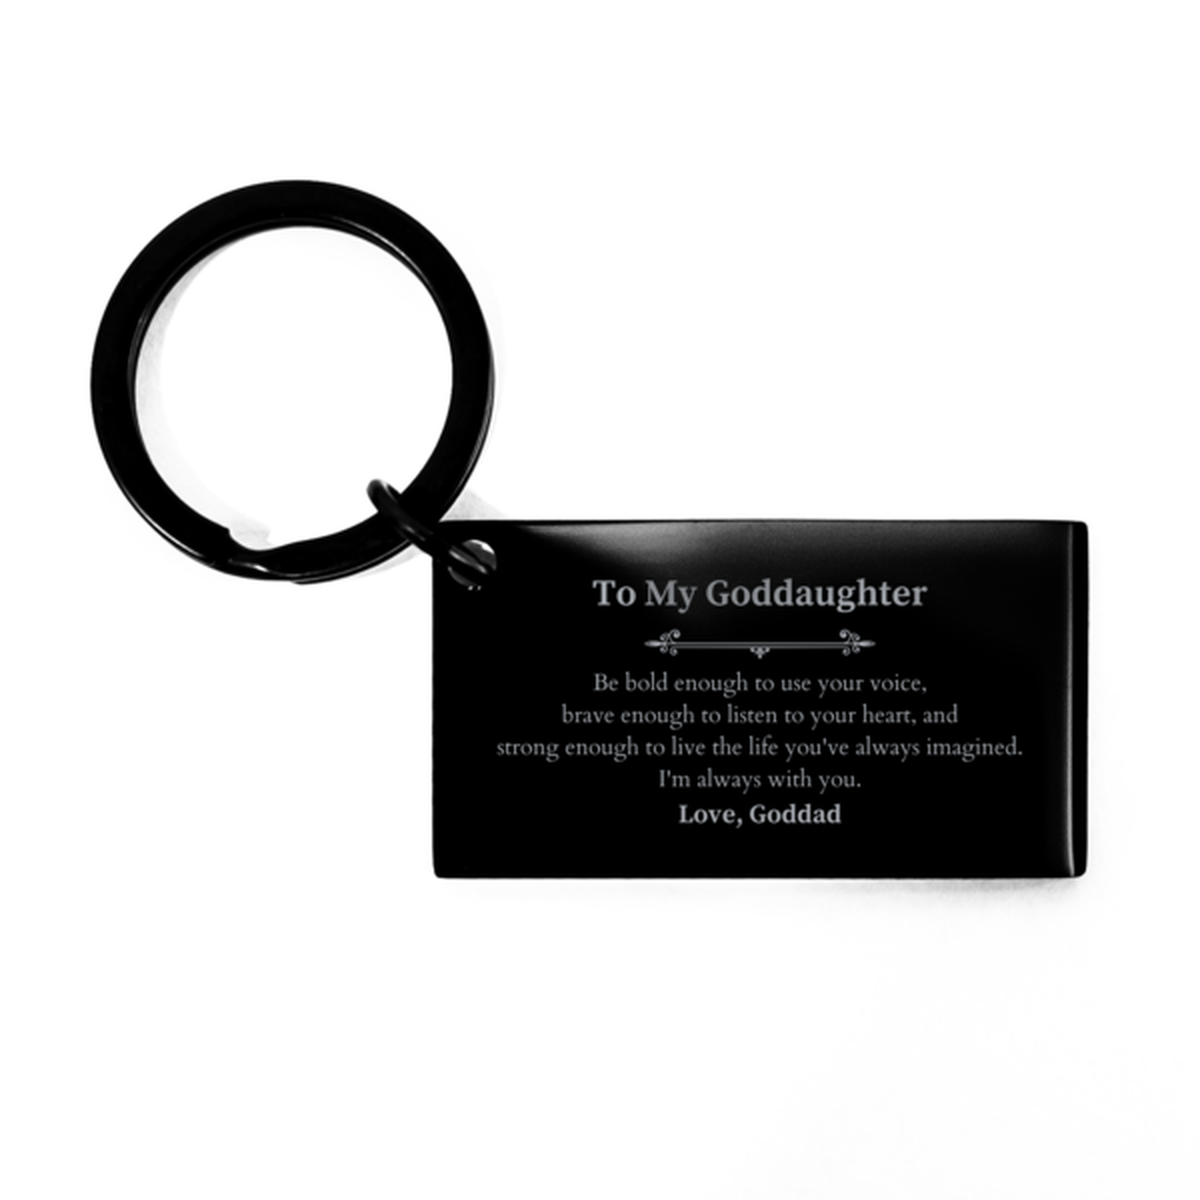 Keepsake Goddaughter Keychain Gift Idea Graduation Christmas Birthday Goddaughter from Goddad, Goddaughter Be bold enough to use your voice, brave enough to listen to your heart. Love, Goddad